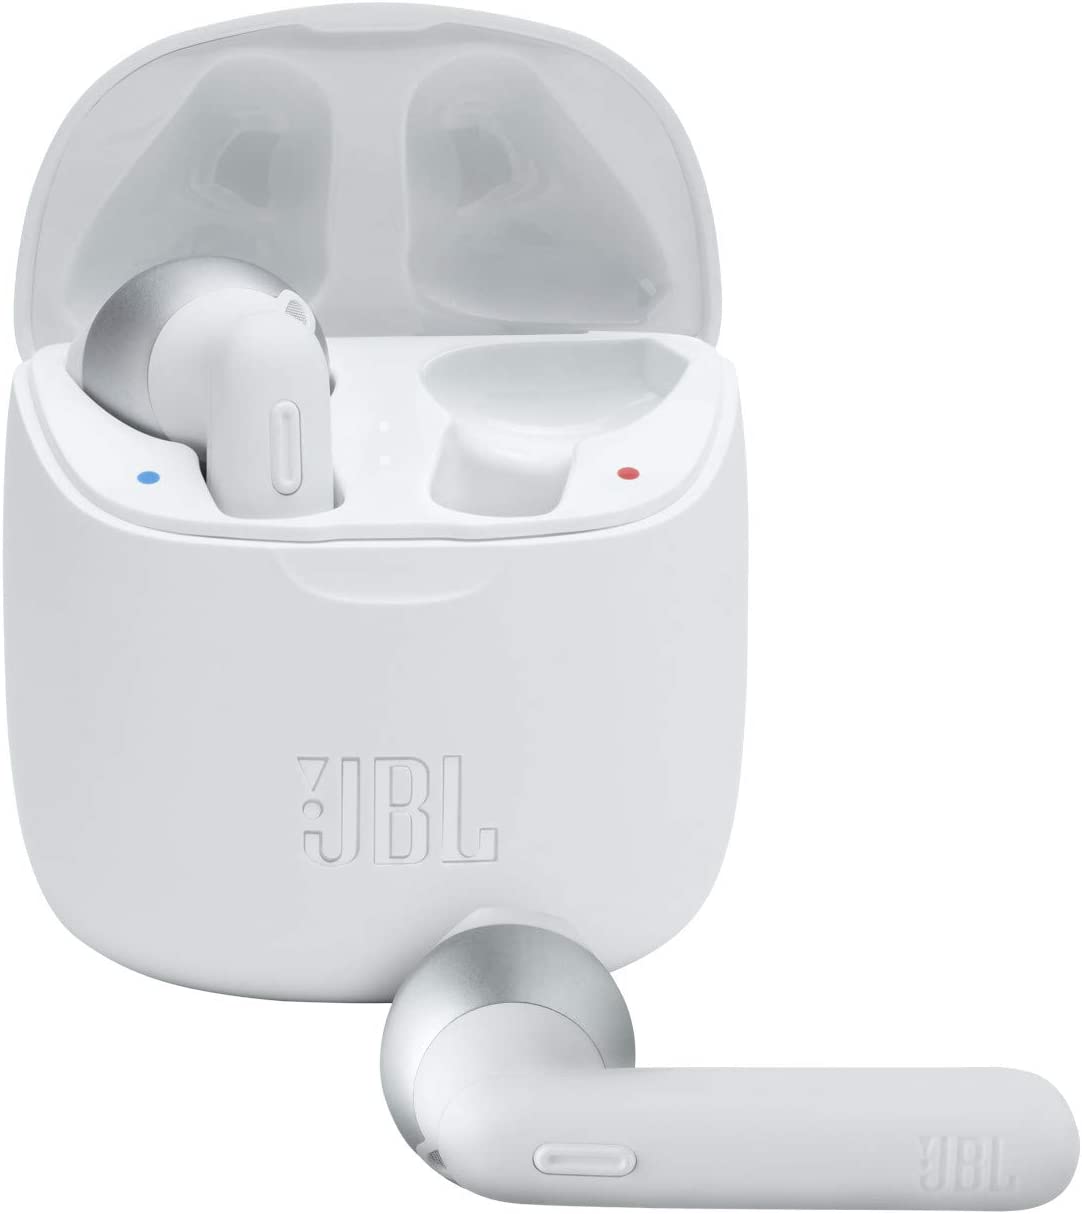 JBL Tune 225TWS True Wireless Earbud Headphones - JBL Pure Bass Sound, Bluetooth, 25H Battery, Dual Connect, Native Voice Assistant (Black)